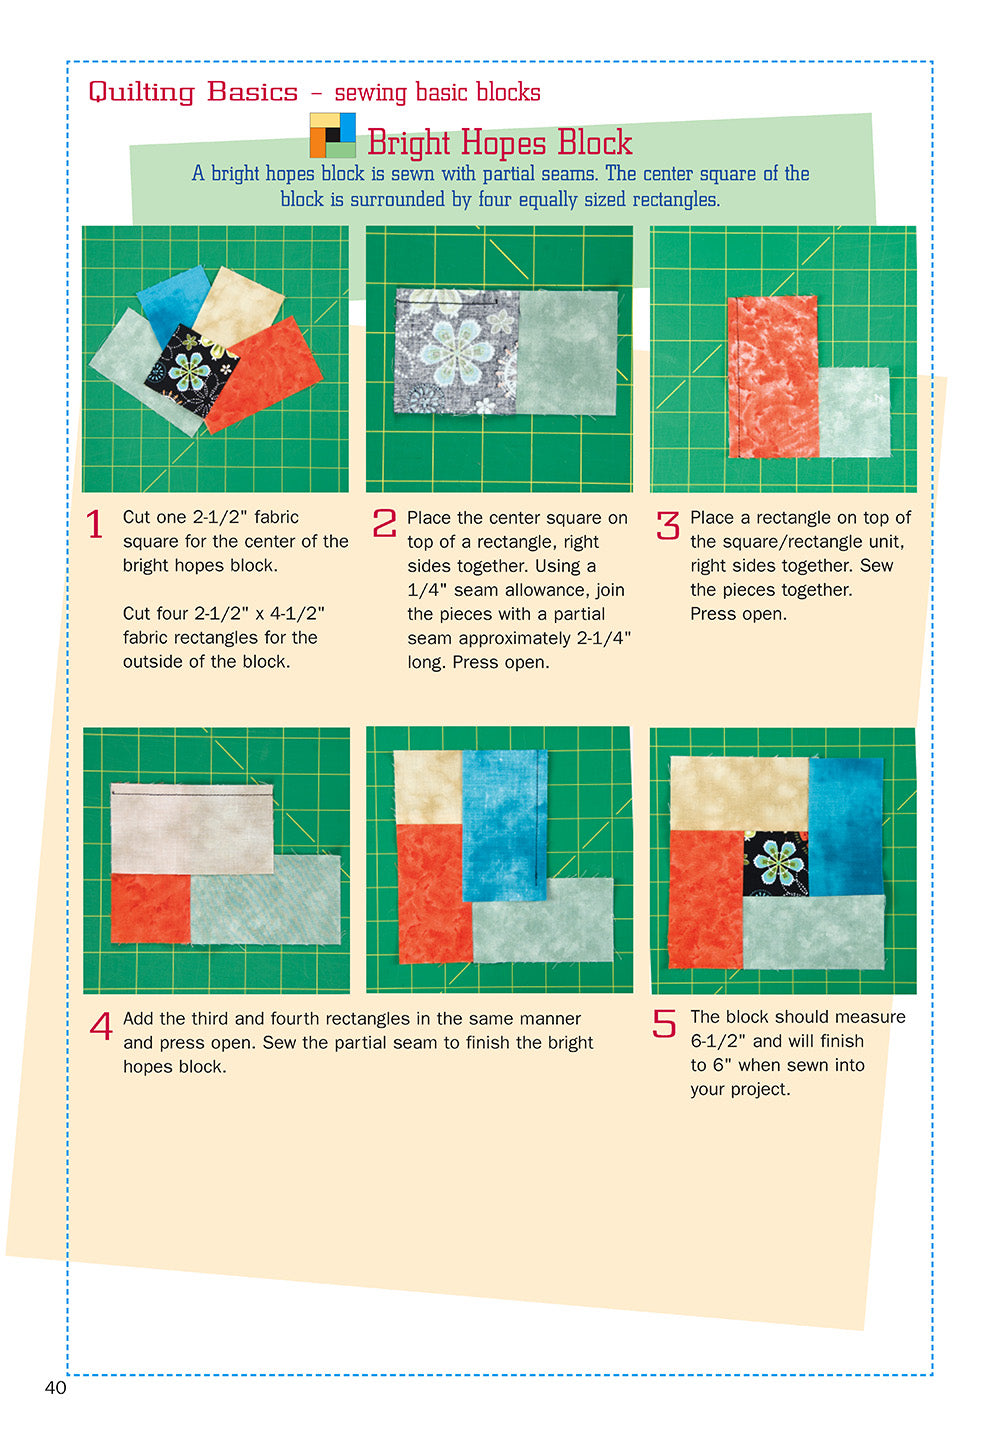 Quilting: The Basics & Beyond